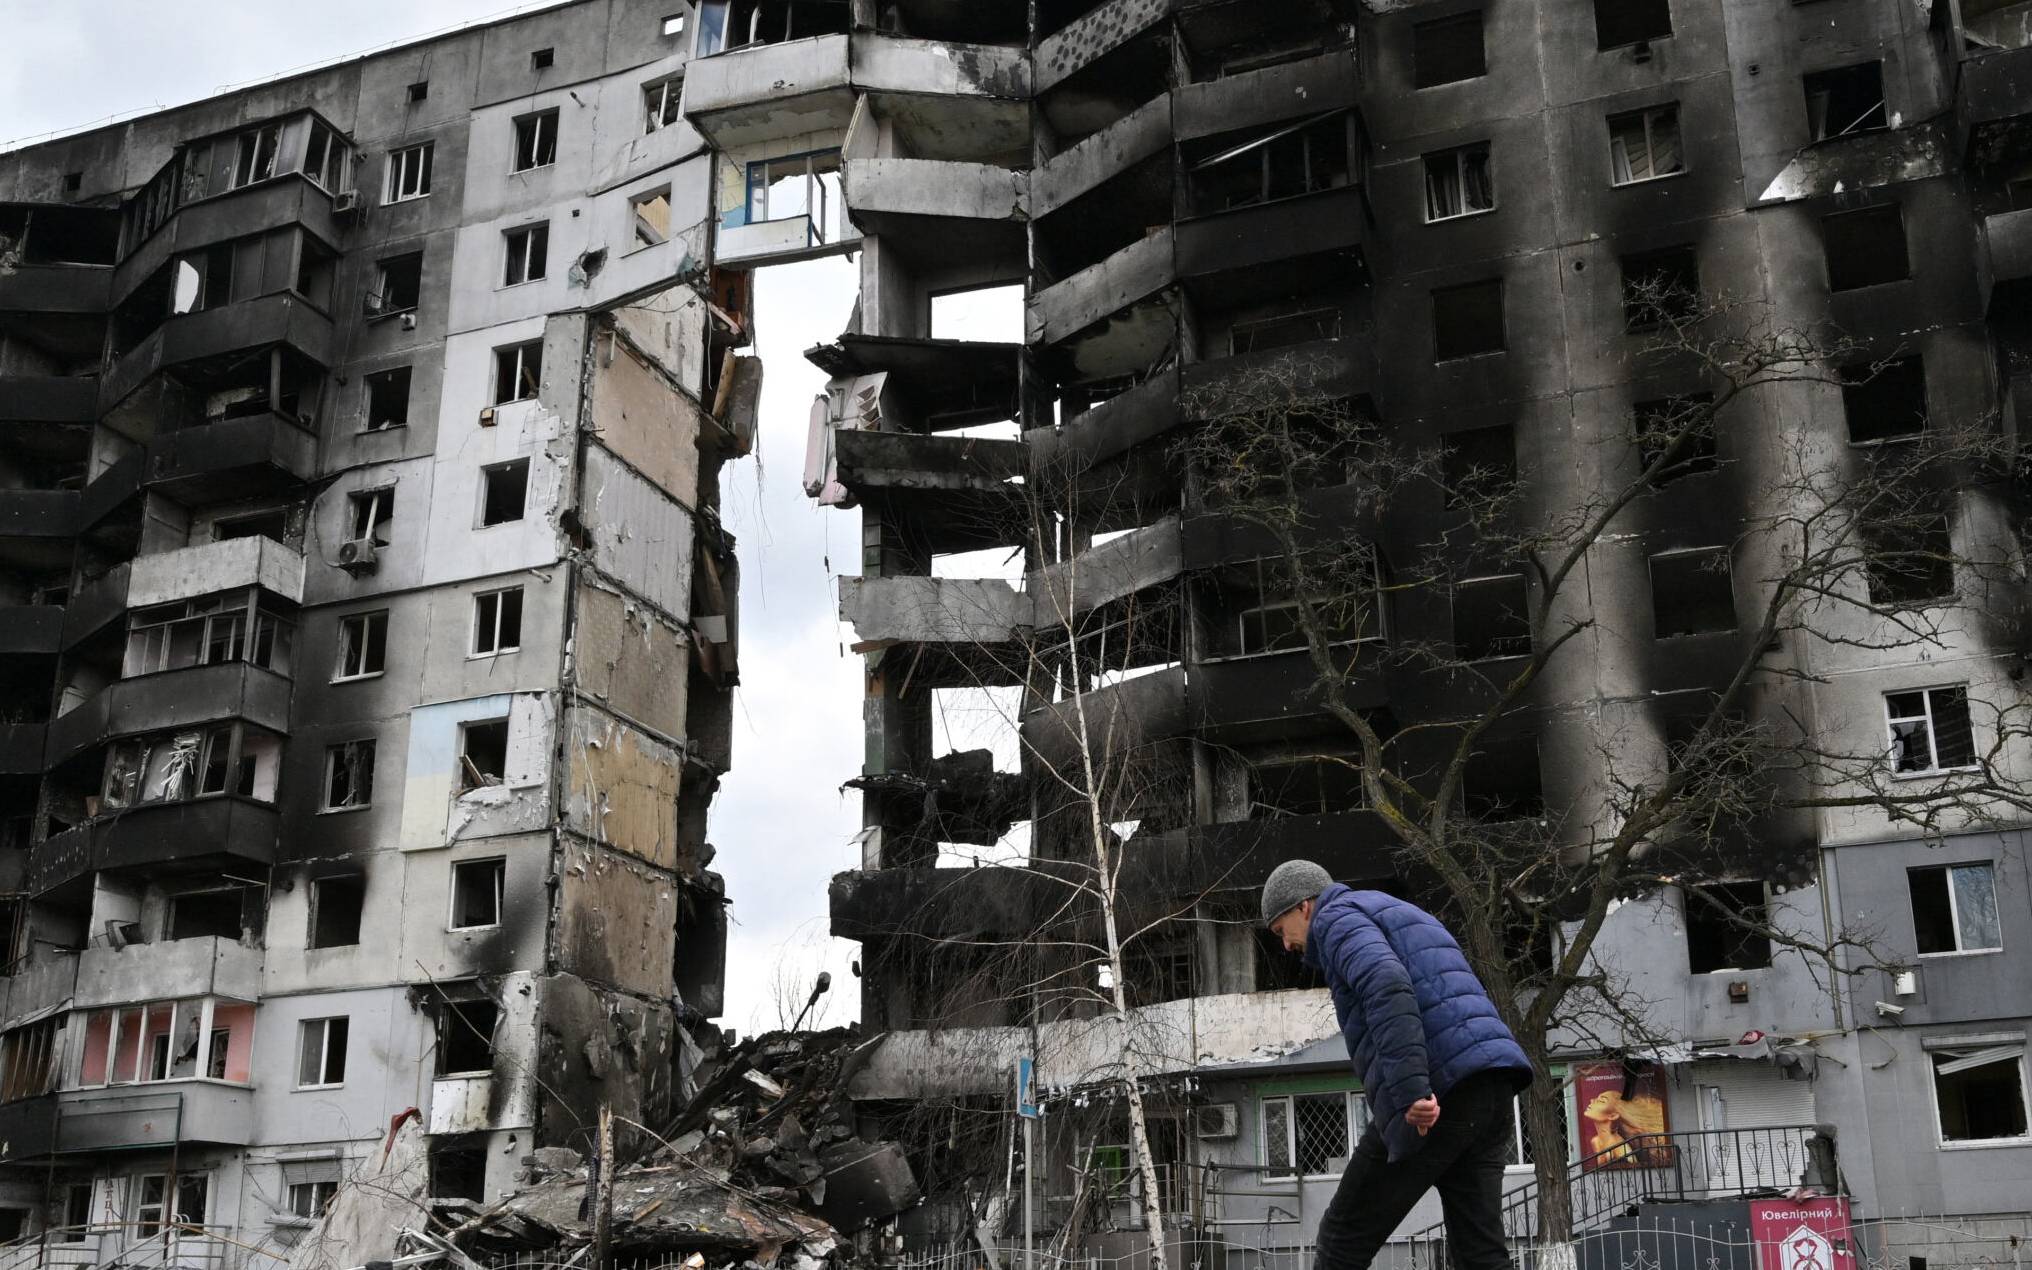 A man walks past destroyed buildings in the town of Borodianka, northwest of Kyiv on April 4, 2022. - The EU said on April 4, 2022, it is urgently discussing a new round of sanctions on Russia as it condemned "atrocities" reported in Ukrainian towns that have been occupied by Moscow's troops. Russia invaded Ukraine on February 24, 2022. (Photo by Sergei SUPINSKY / AFP)